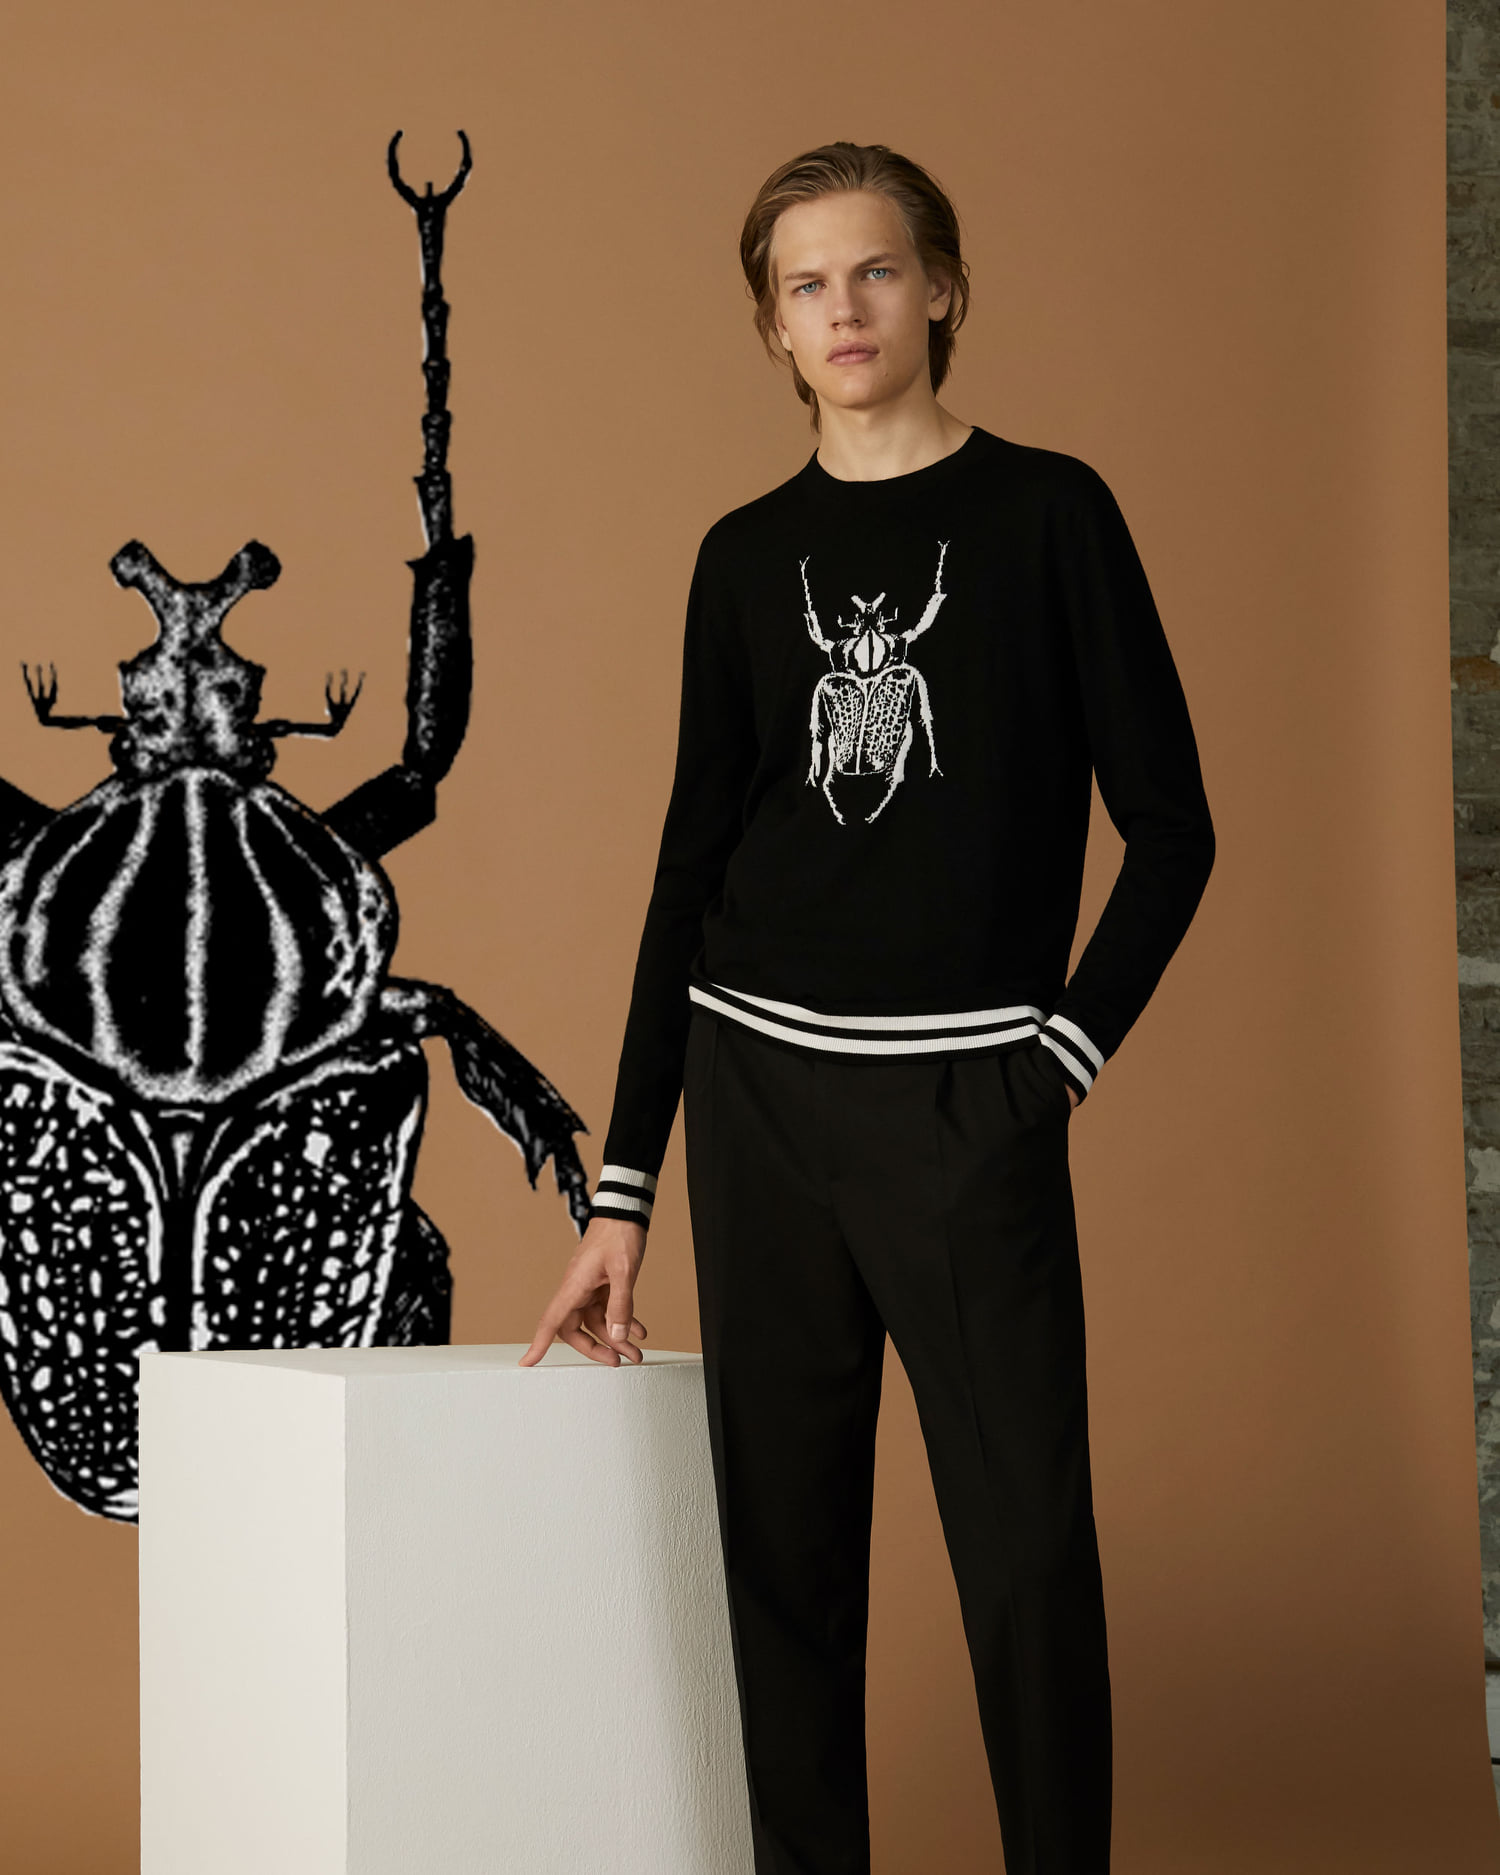 Shop the new print series for spring/summer ‘20 inspired by one of the largest insects on the planet. For him: paul-smith.co/s4QSeb